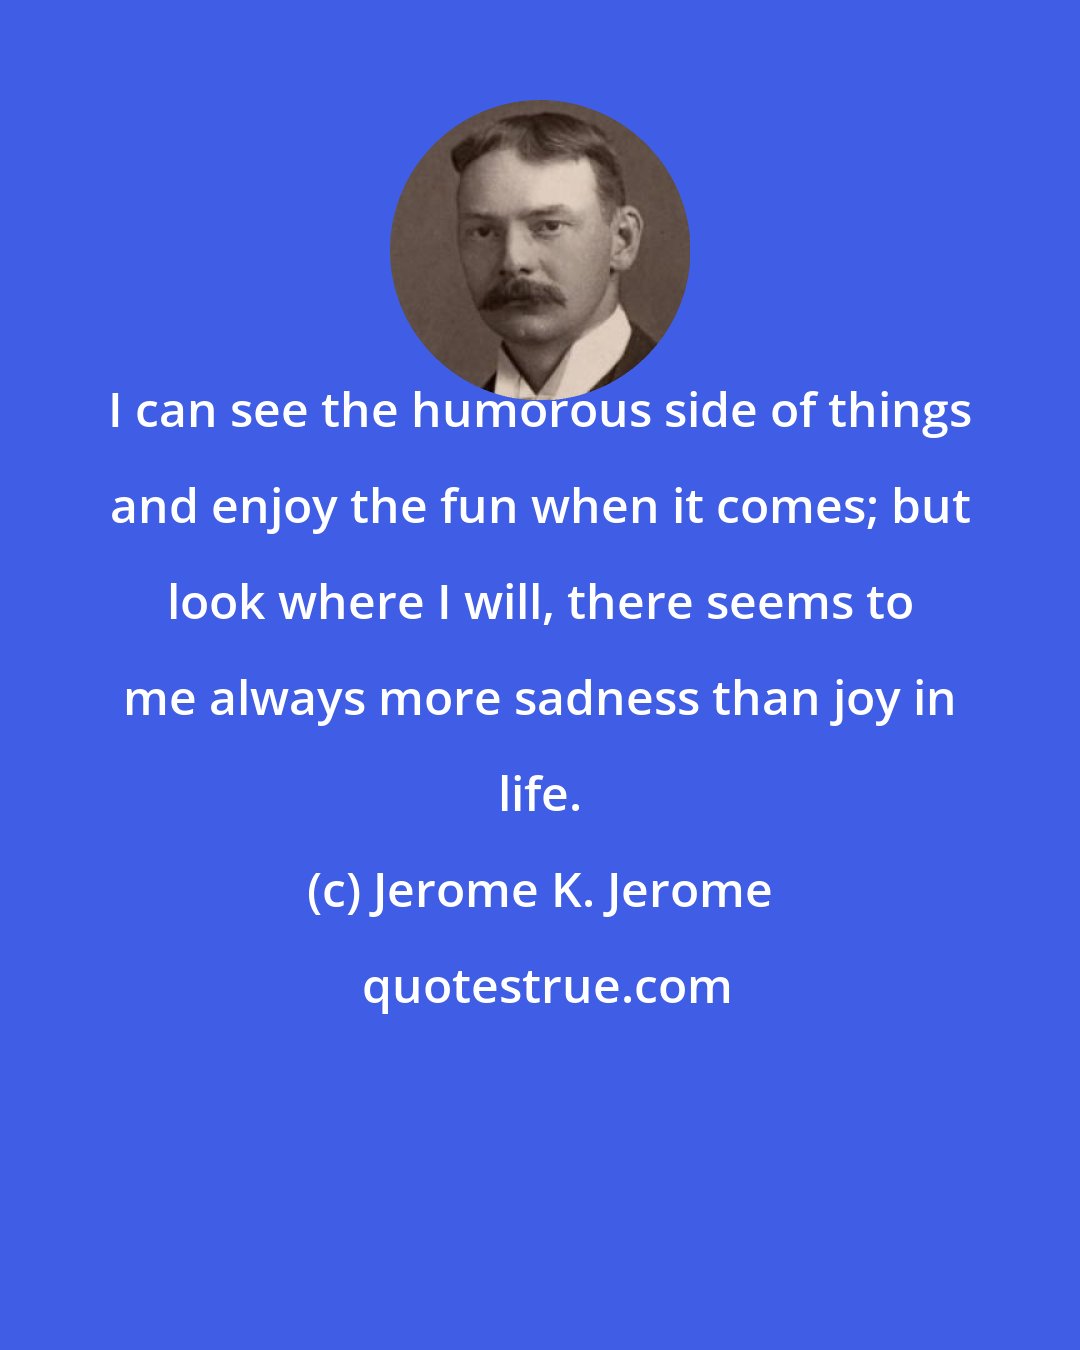 Jerome K. Jerome: I can see the humorous side of things and enjoy the fun when it comes; but look where I will, there seems to me always more sadness than joy in life.